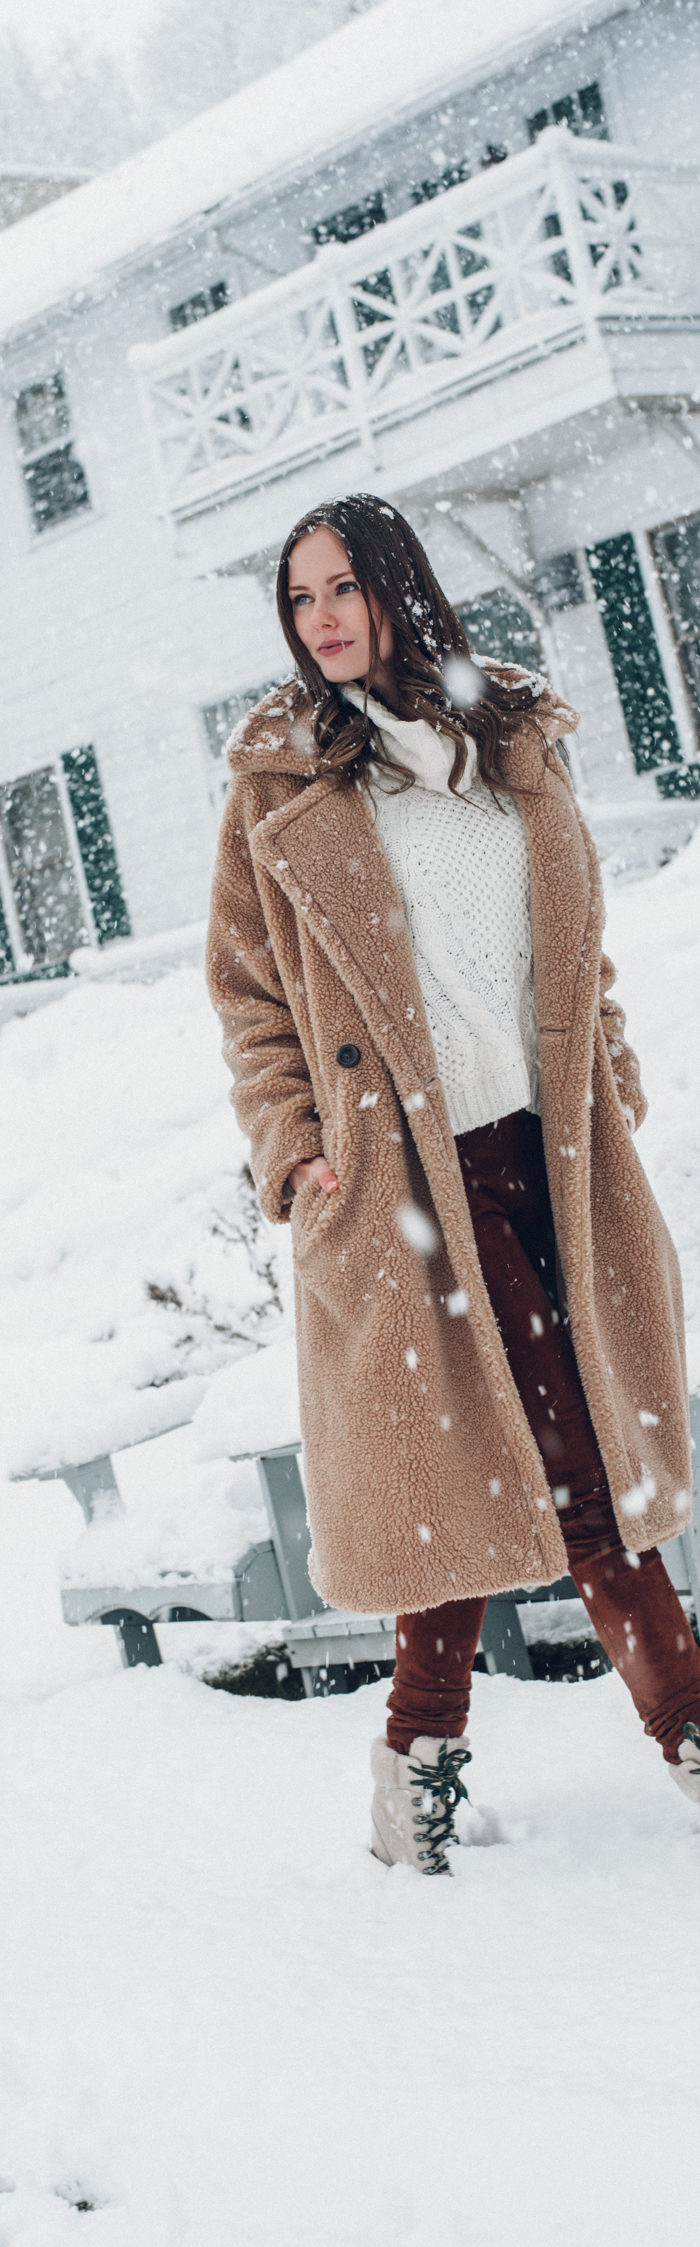 Alyssa Campanella of The A List blog visits Manoir Hovey in Québec wearing Storets Teddy Coat, Joseph suede pants, and Frye Samantha hiker boots